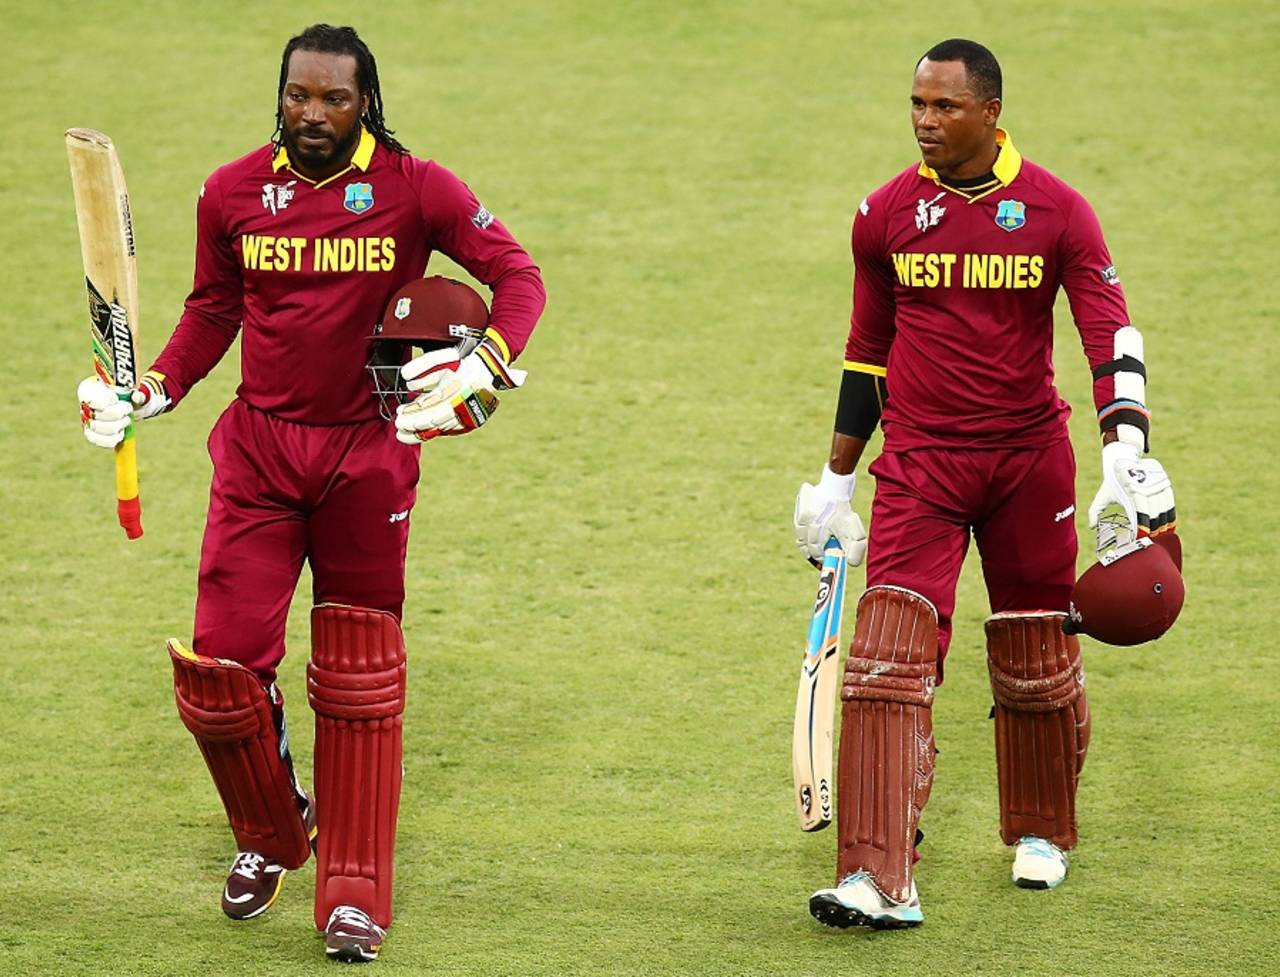 Besides the game against Zimbabwe, Chris Gayle and Marlon Samuels have scored just 102 runs between them this World Cup&nbsp;&nbsp;&bull;&nbsp;&nbsp;ICC